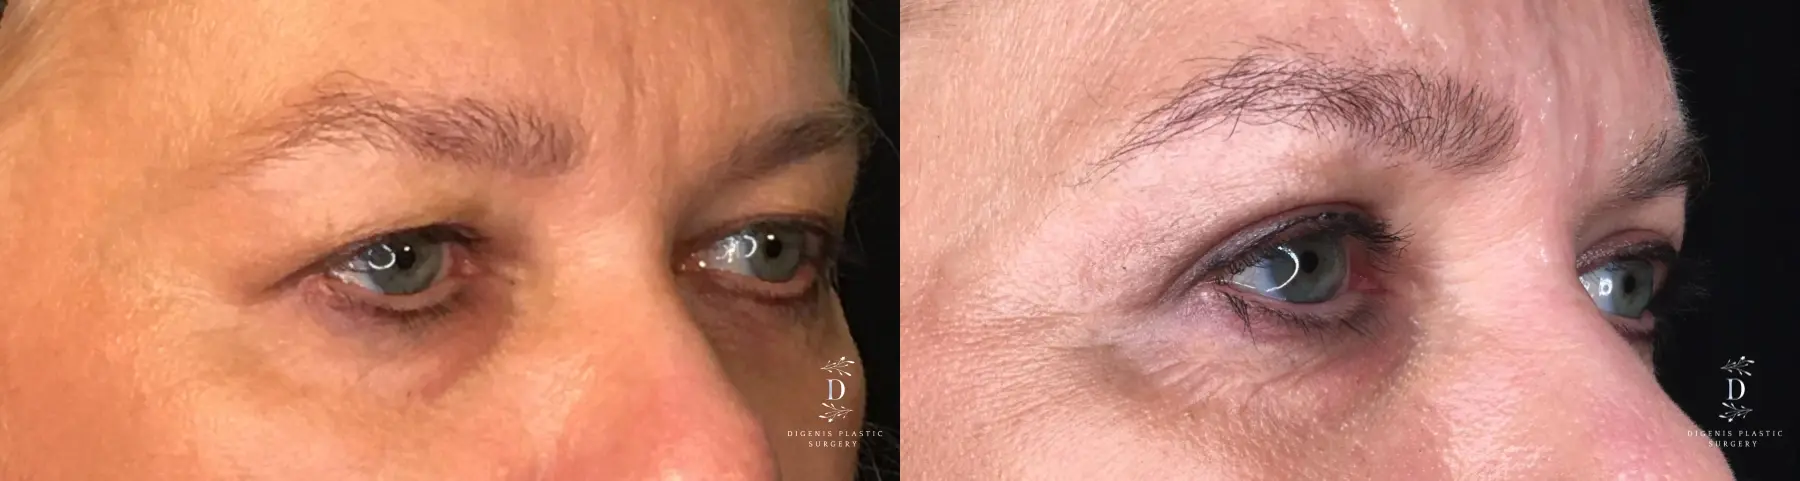 Eyelid Surgery: Patient 21 - Before and After 4